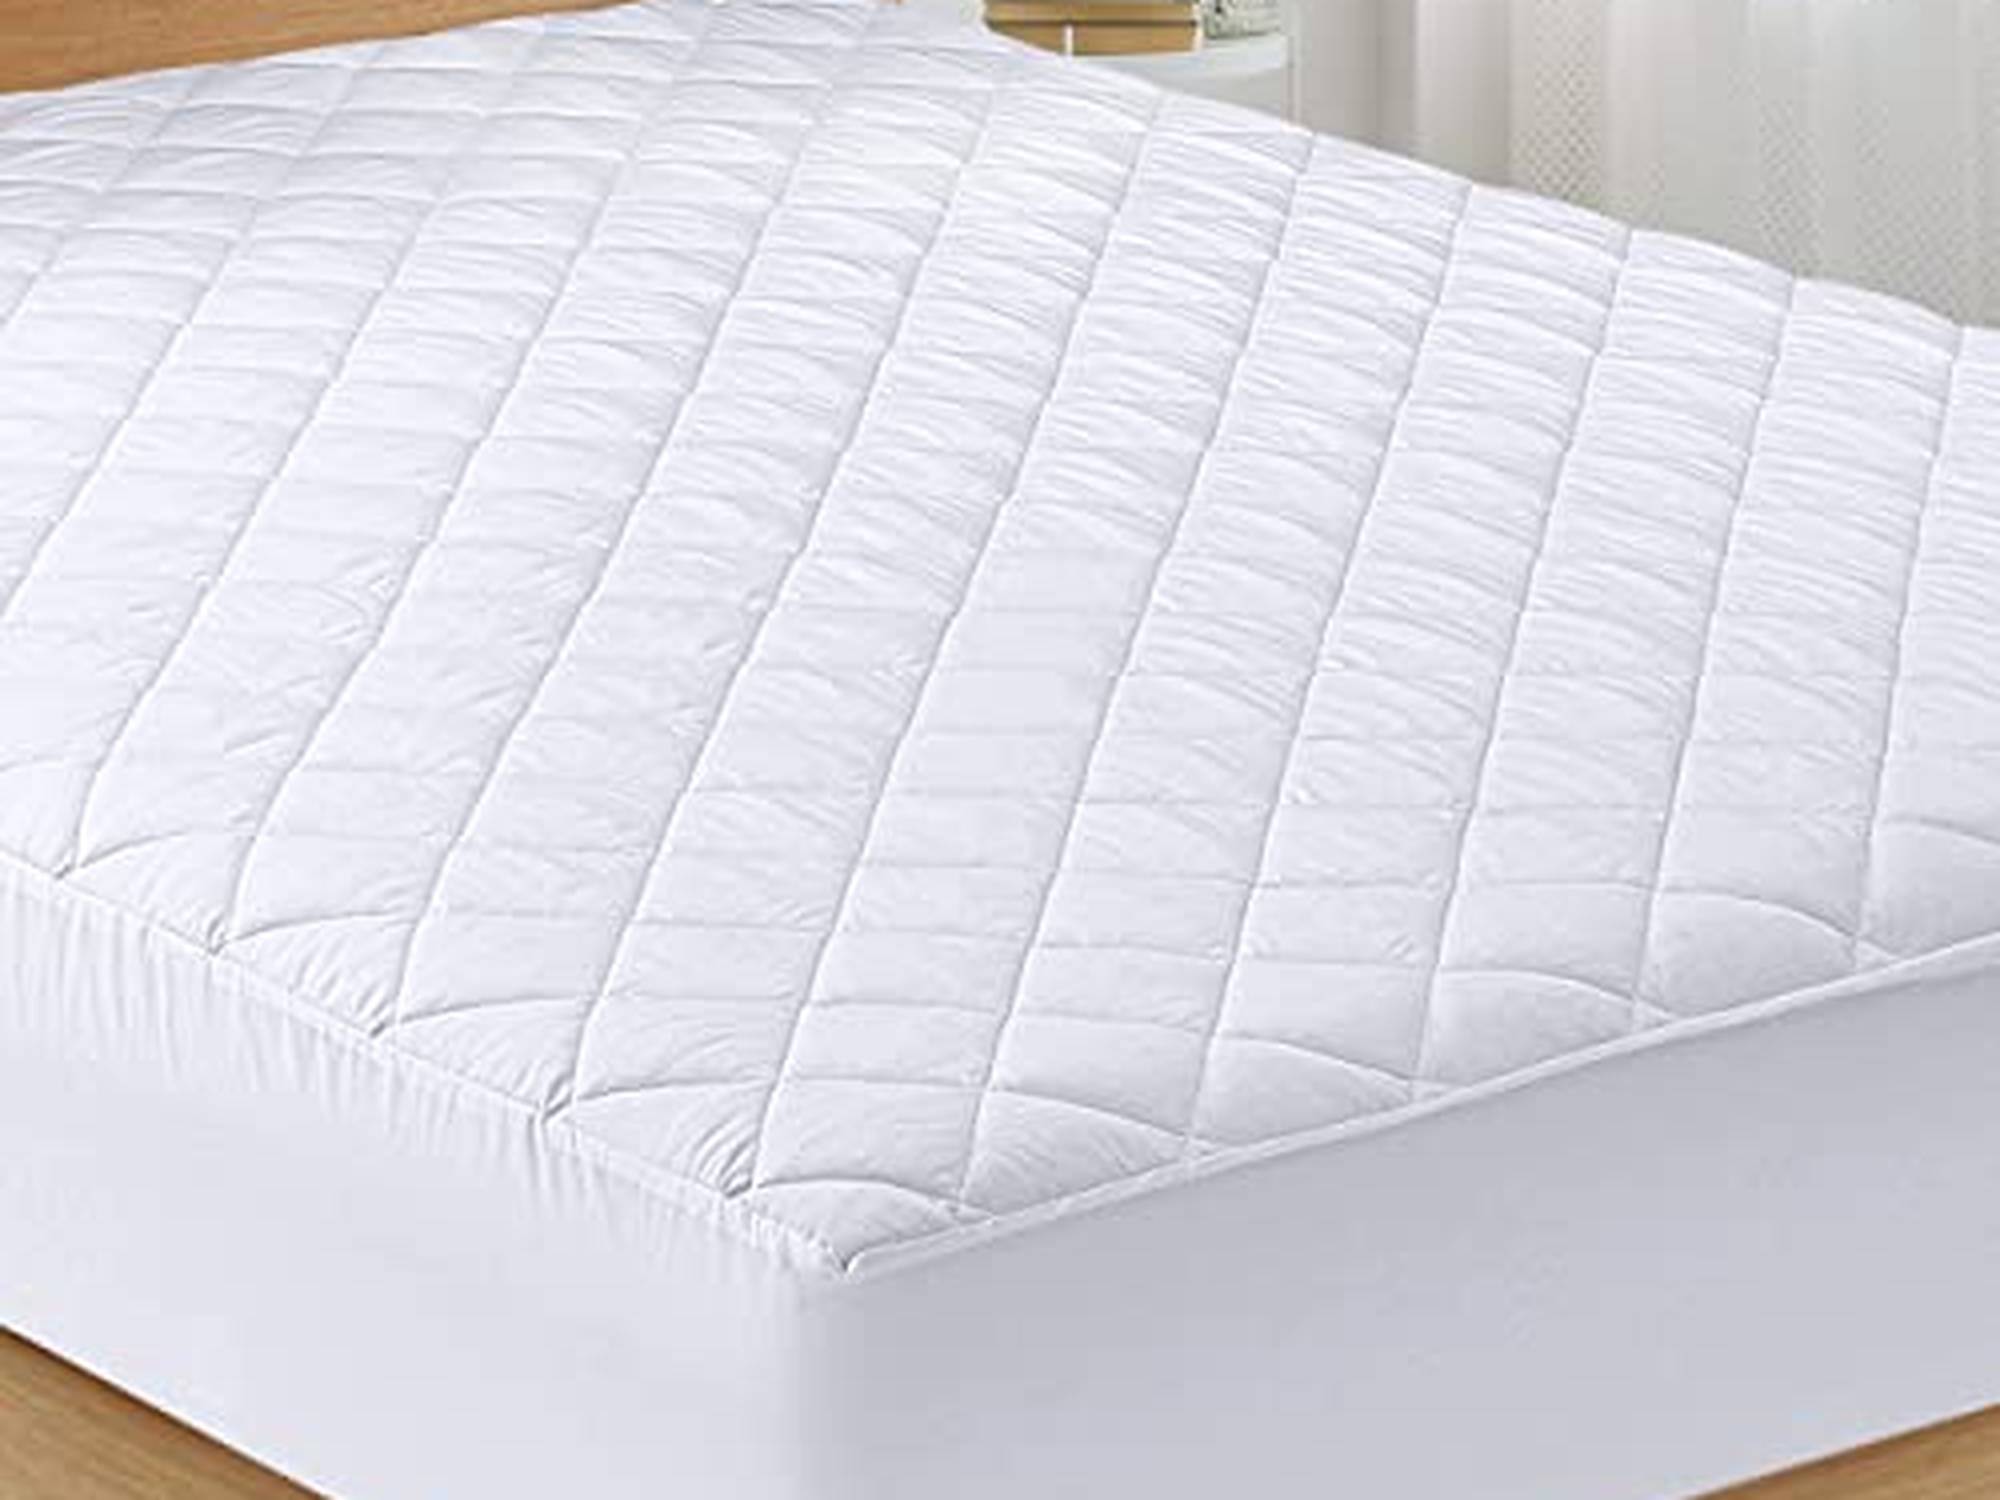 Upgrade your sleep experience with our top-quality mattresses in Riyadh